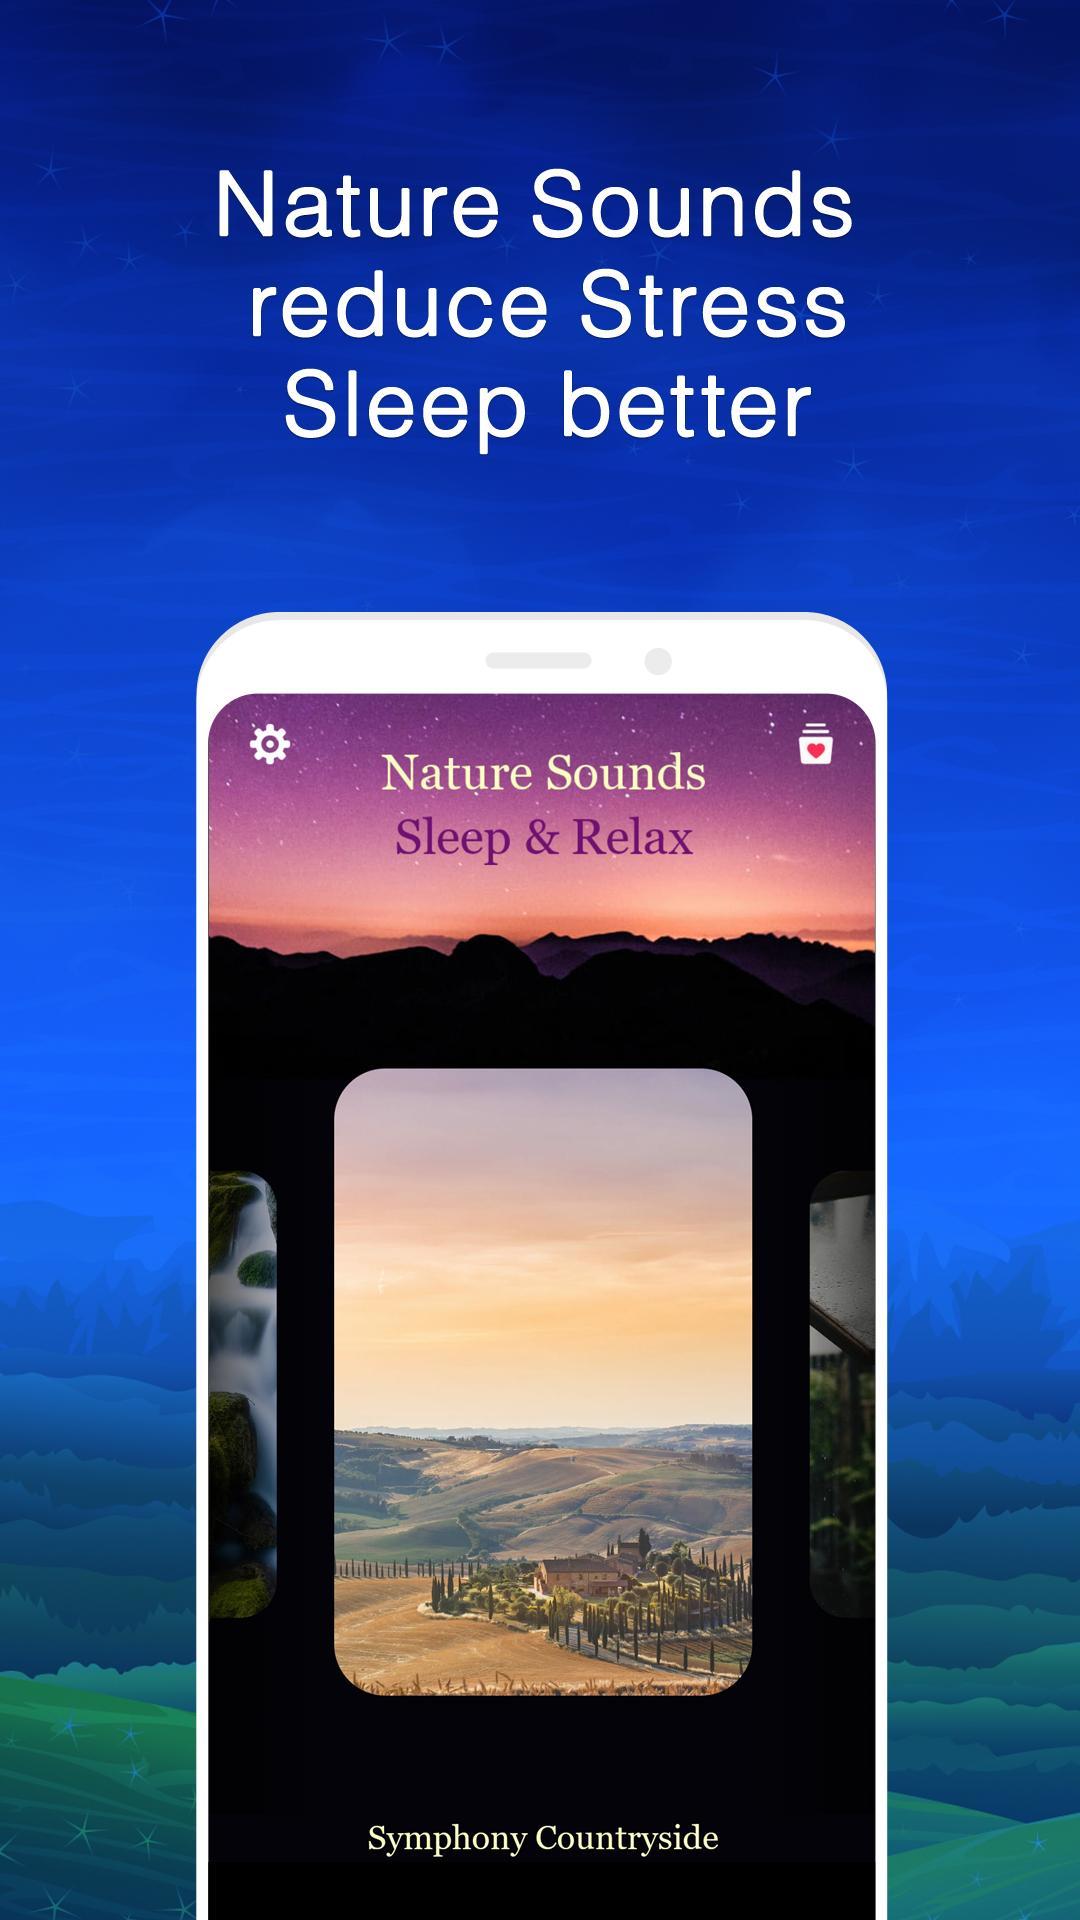 Nature Sounds: Meditation, Sleep, Relax for Android - APK Download